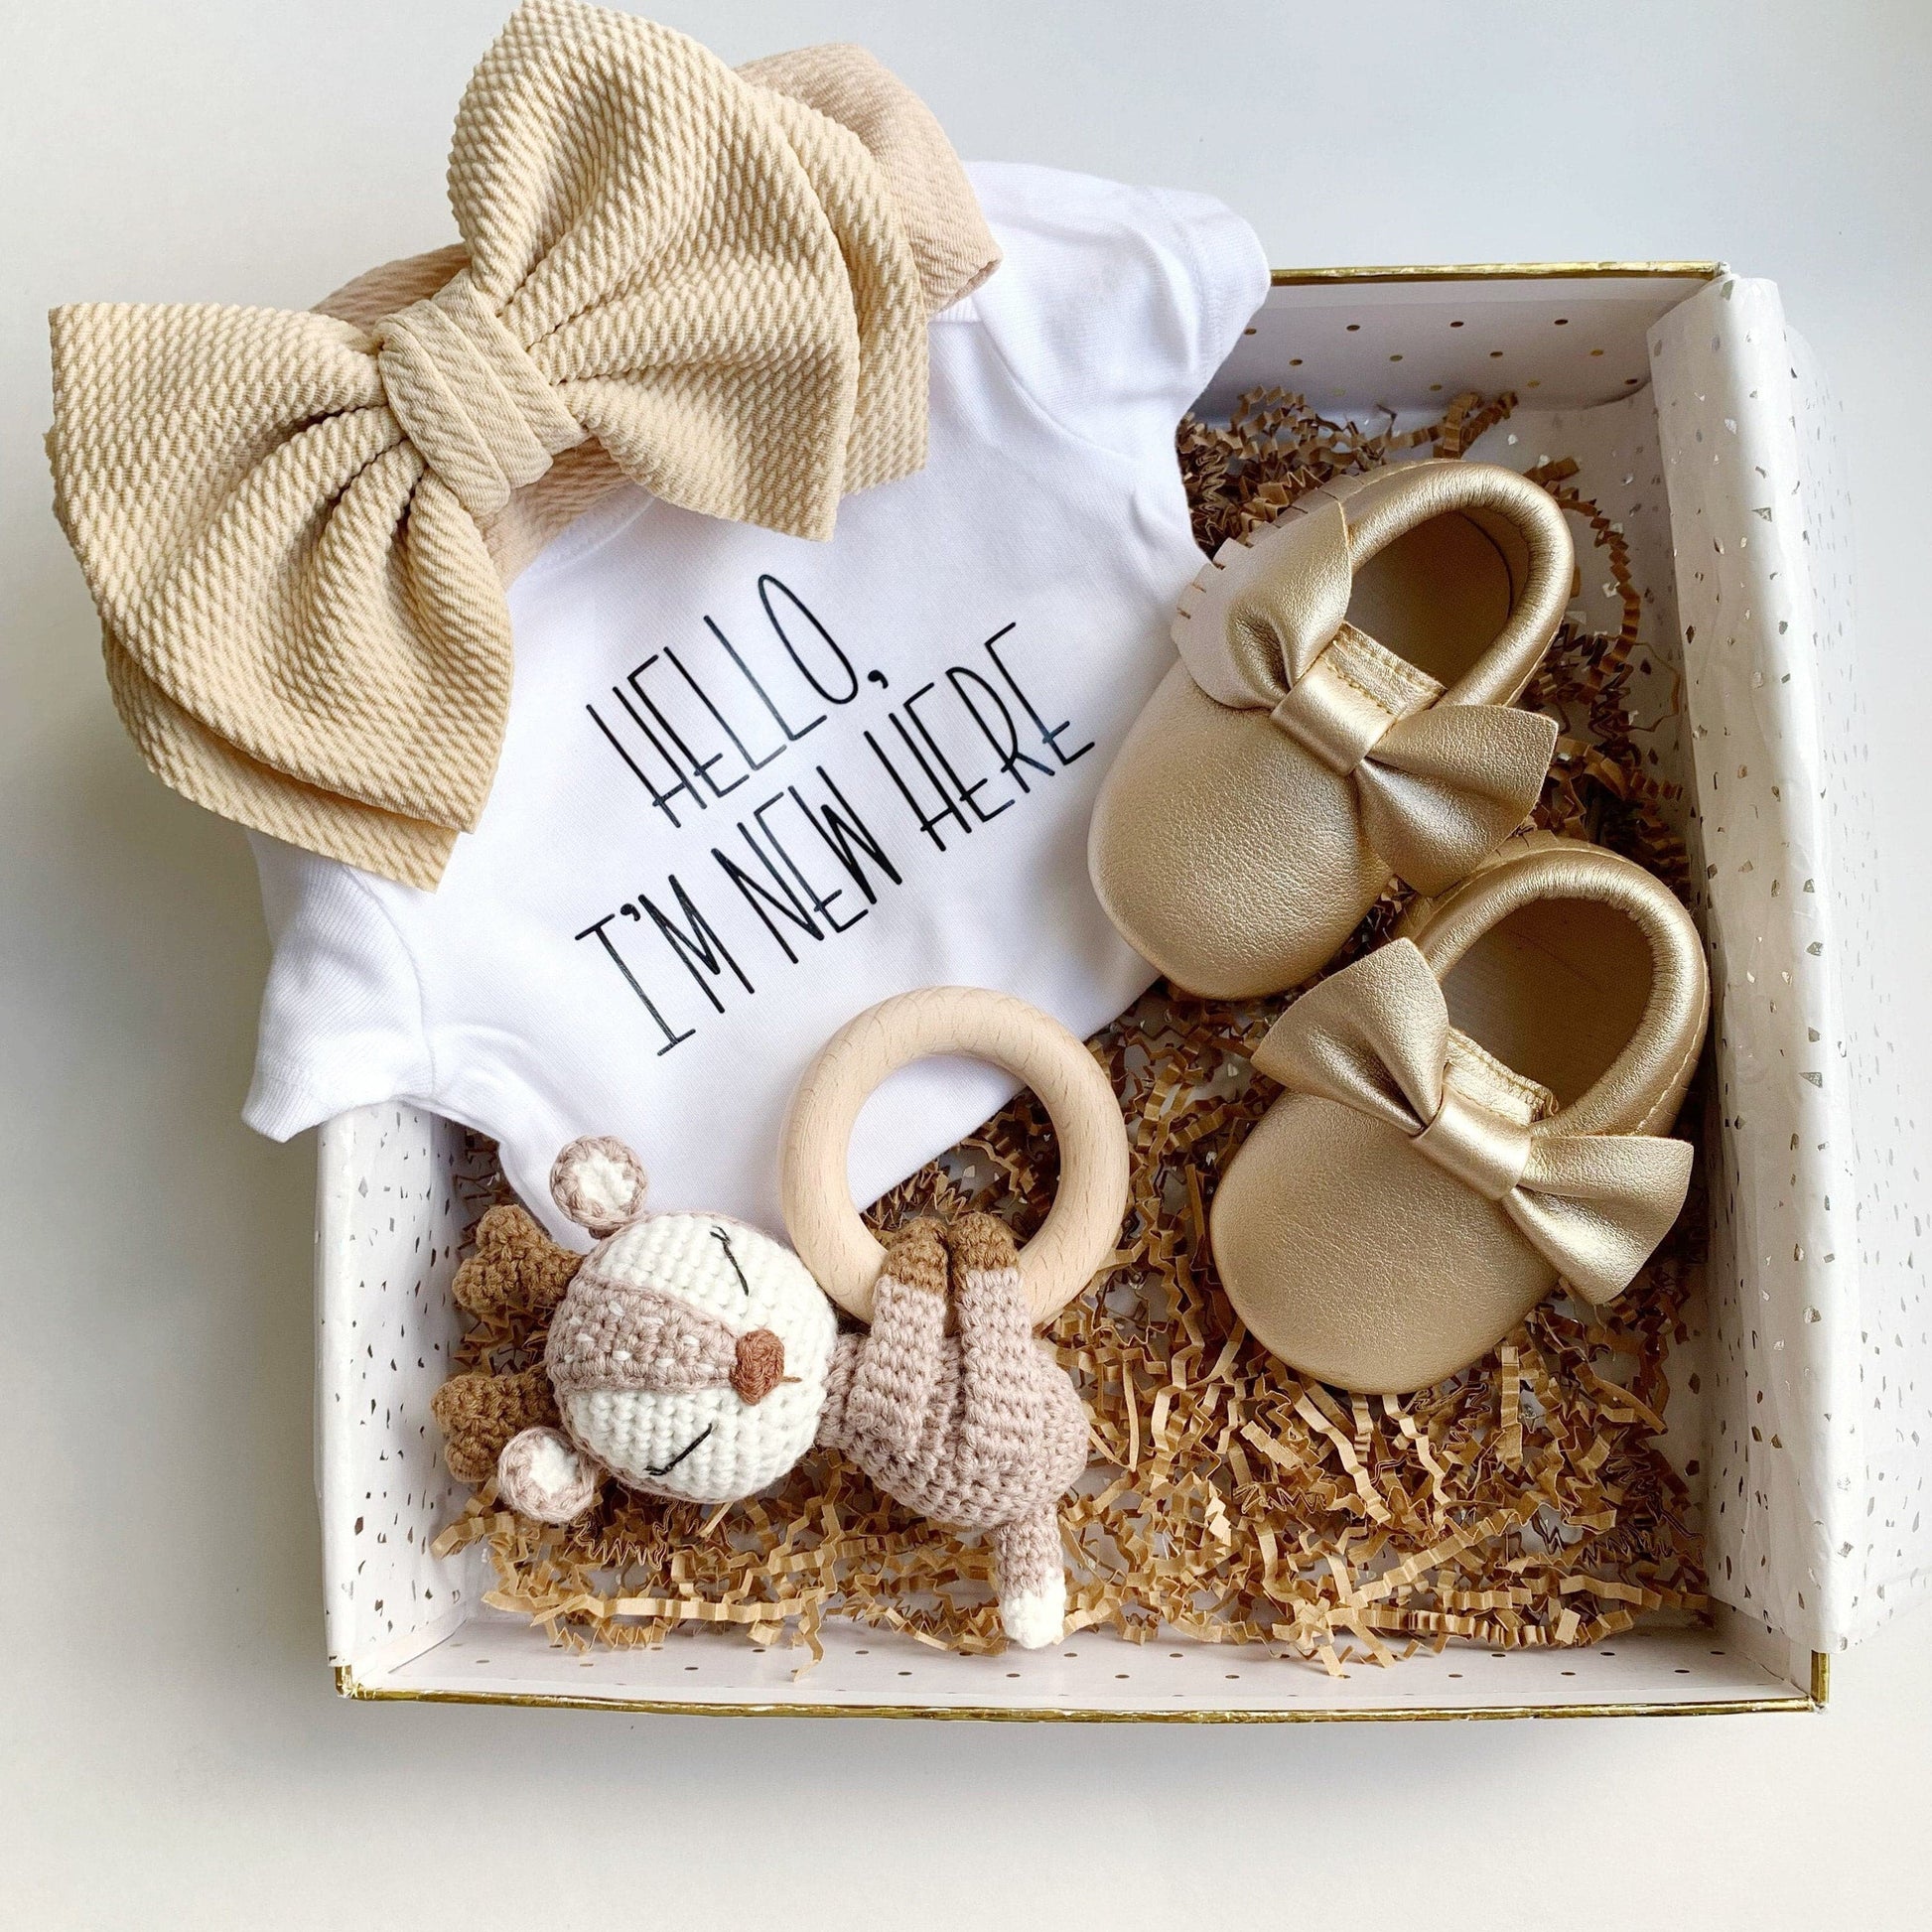 Baby Girl Gift Set Box - Gold Shoes and Bow, Brown and White Woodland Baby Rattle Teething Ring.